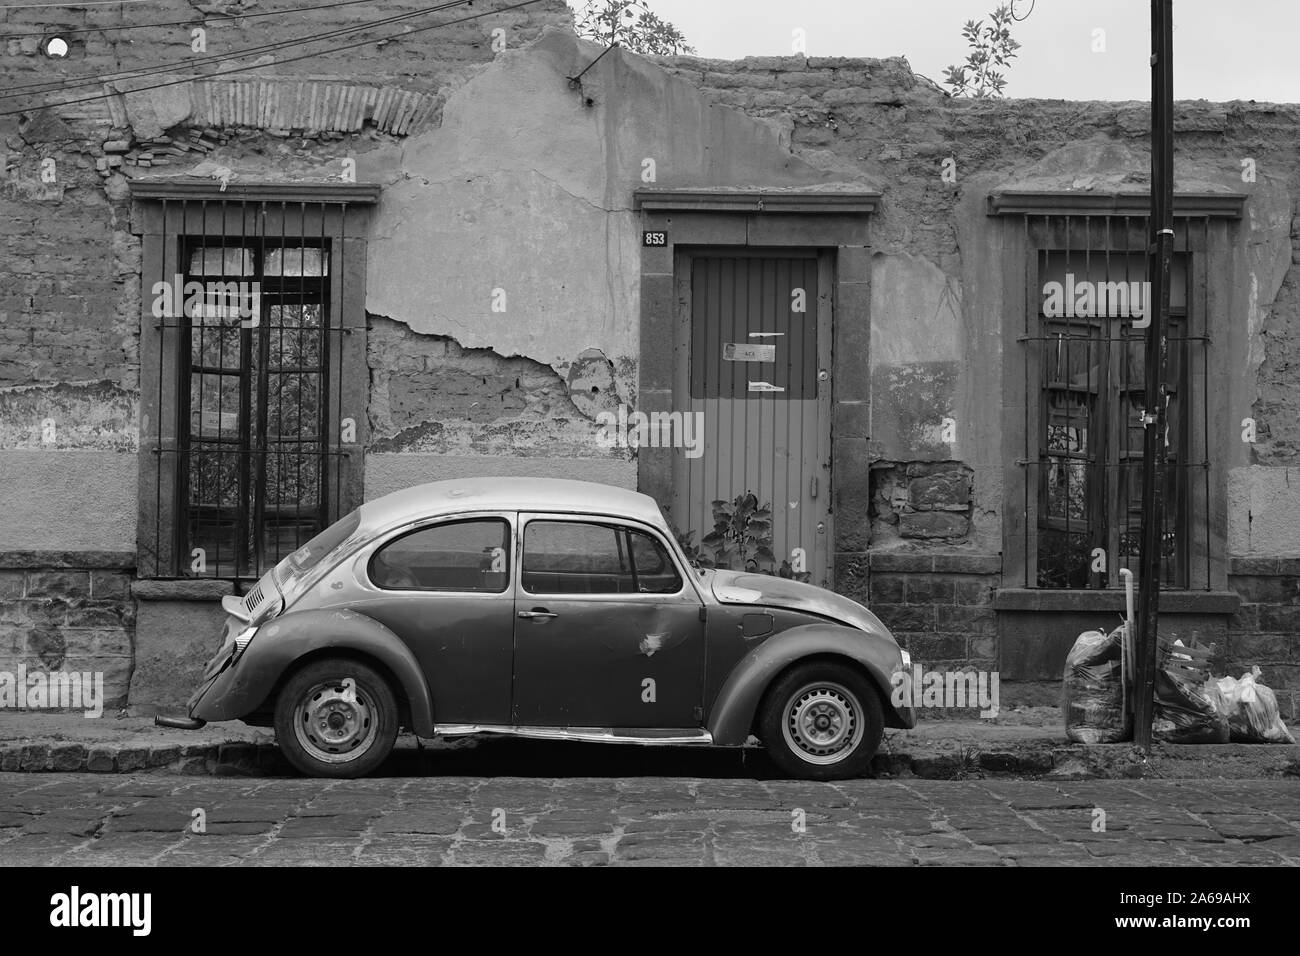 Vintage Volkswagen Bug parked on the street in San Luis Potosi, Mexico. Beetle parked in front of old historic home. Stock Photo